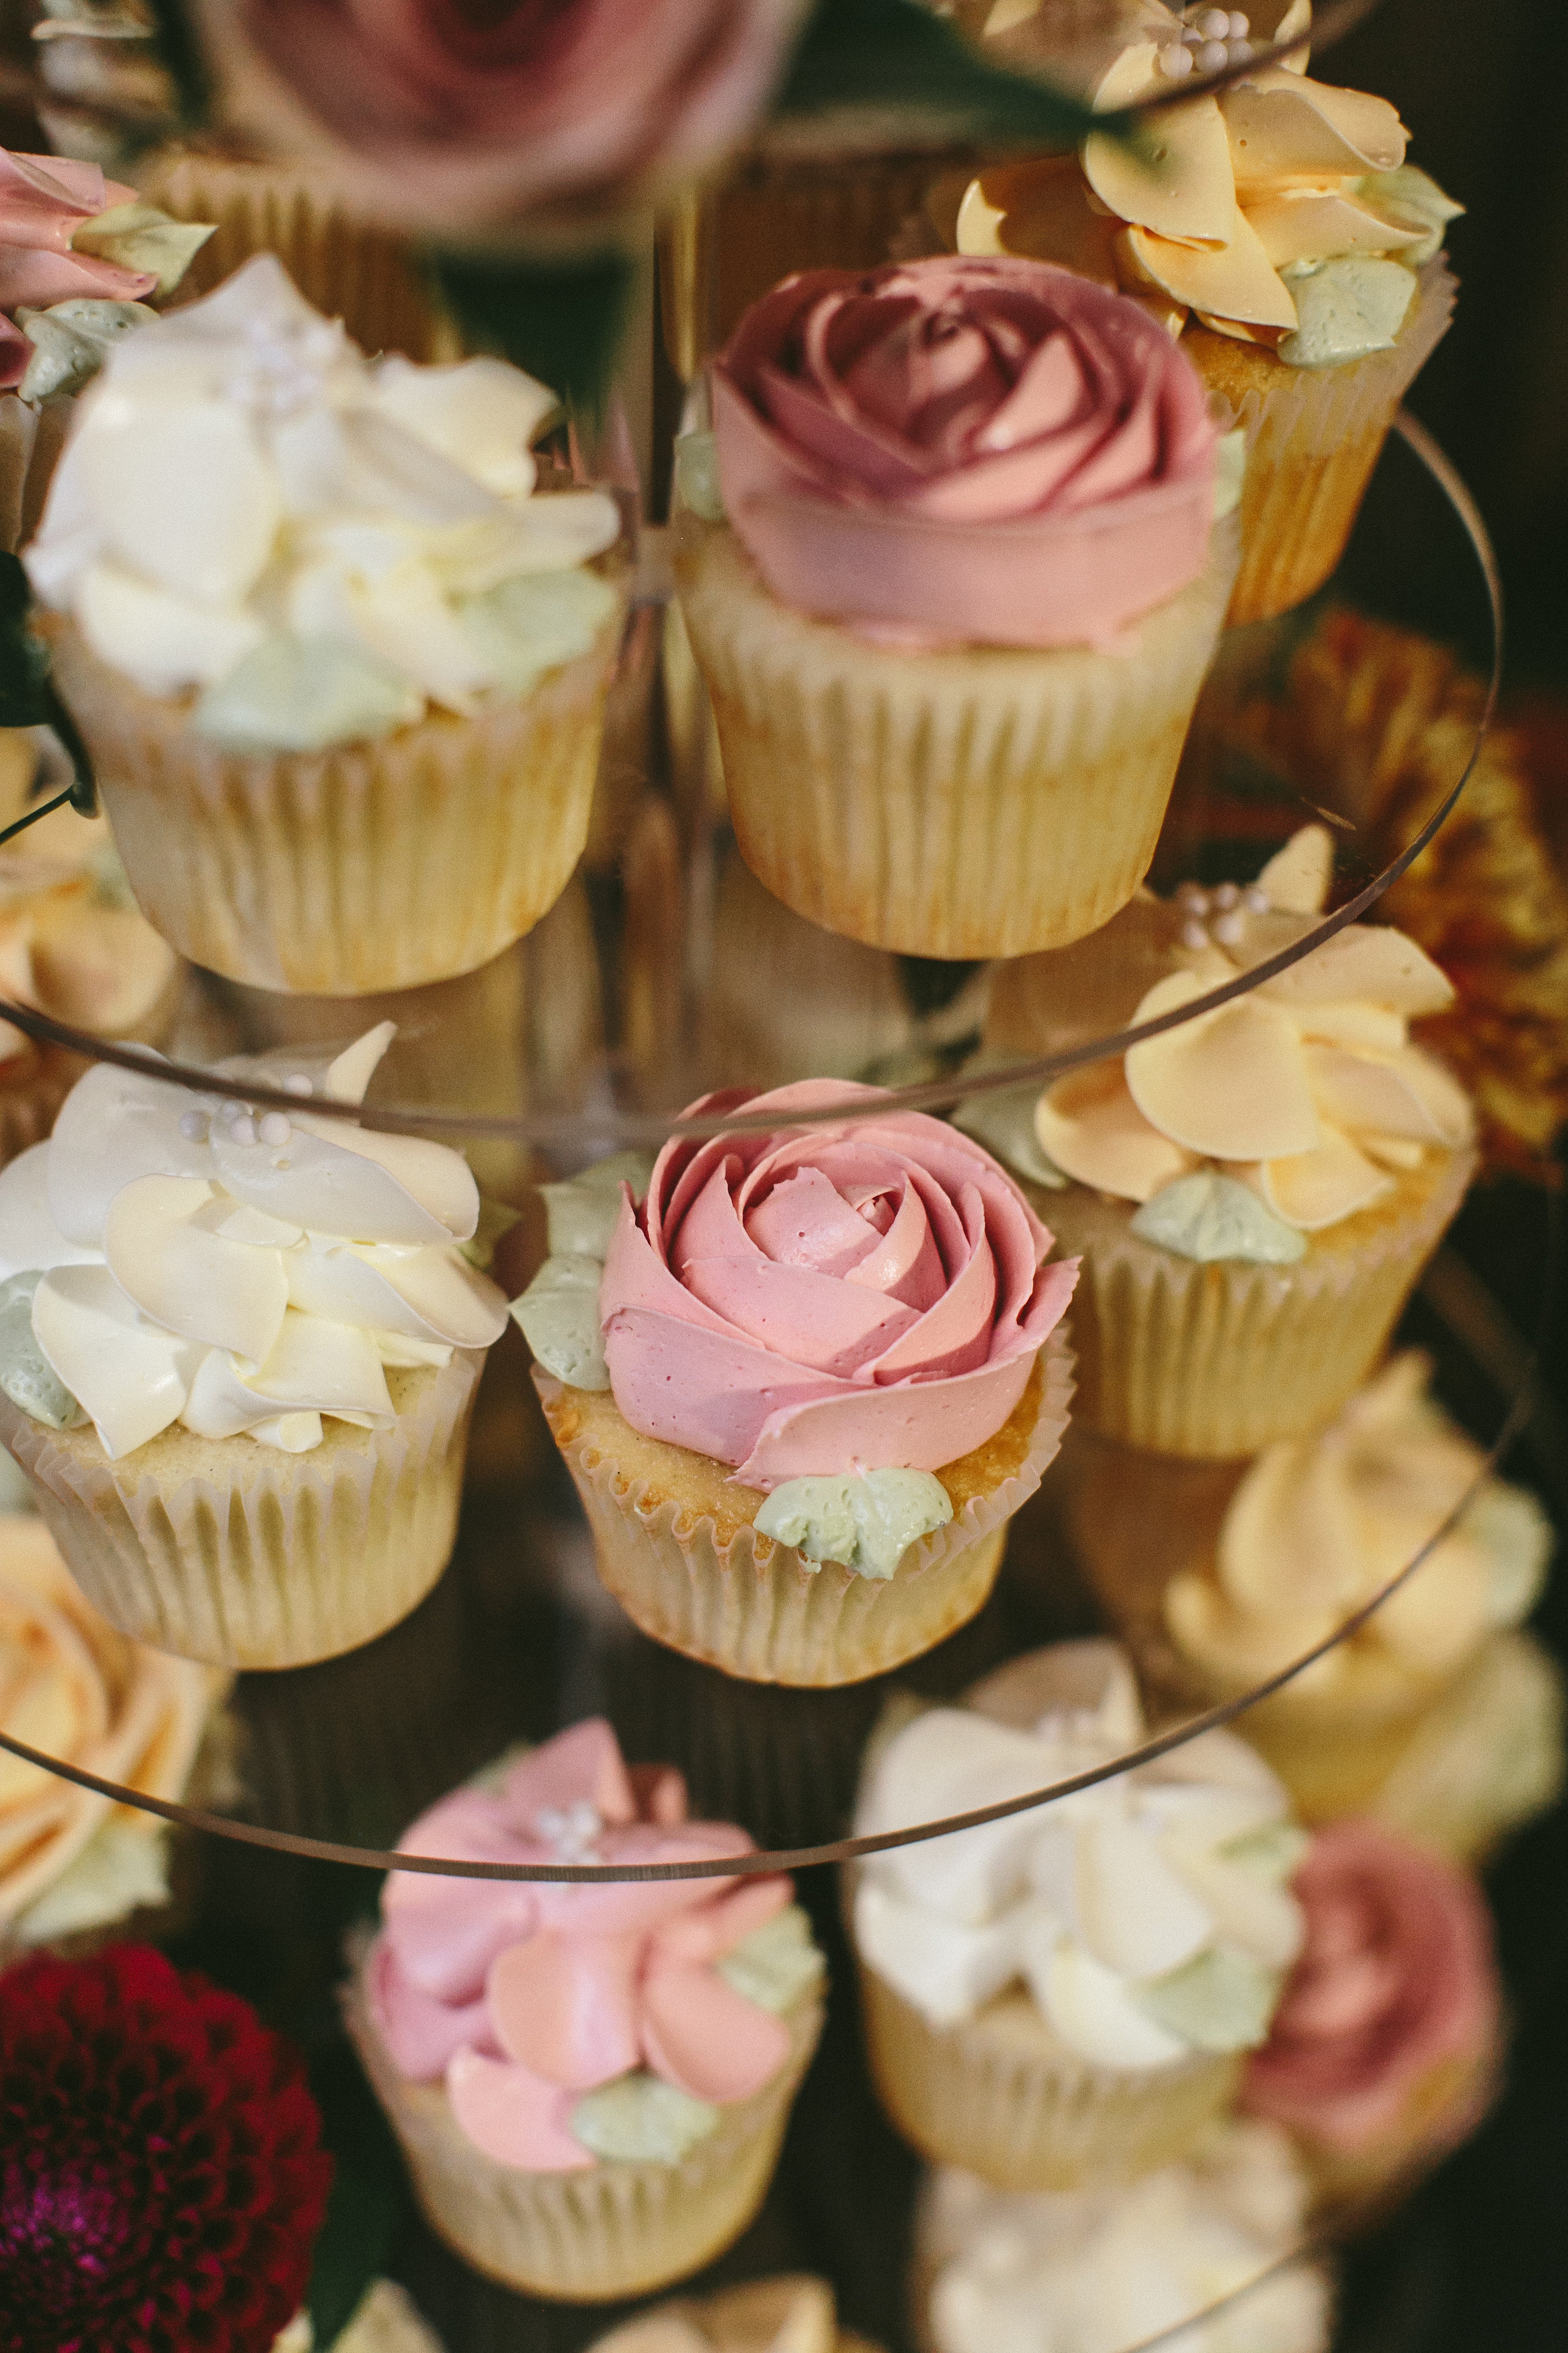 Elegant and Rustic Toronto Wedding in the Distillery District - Buttercream cupcakes from Bobbette and Belle